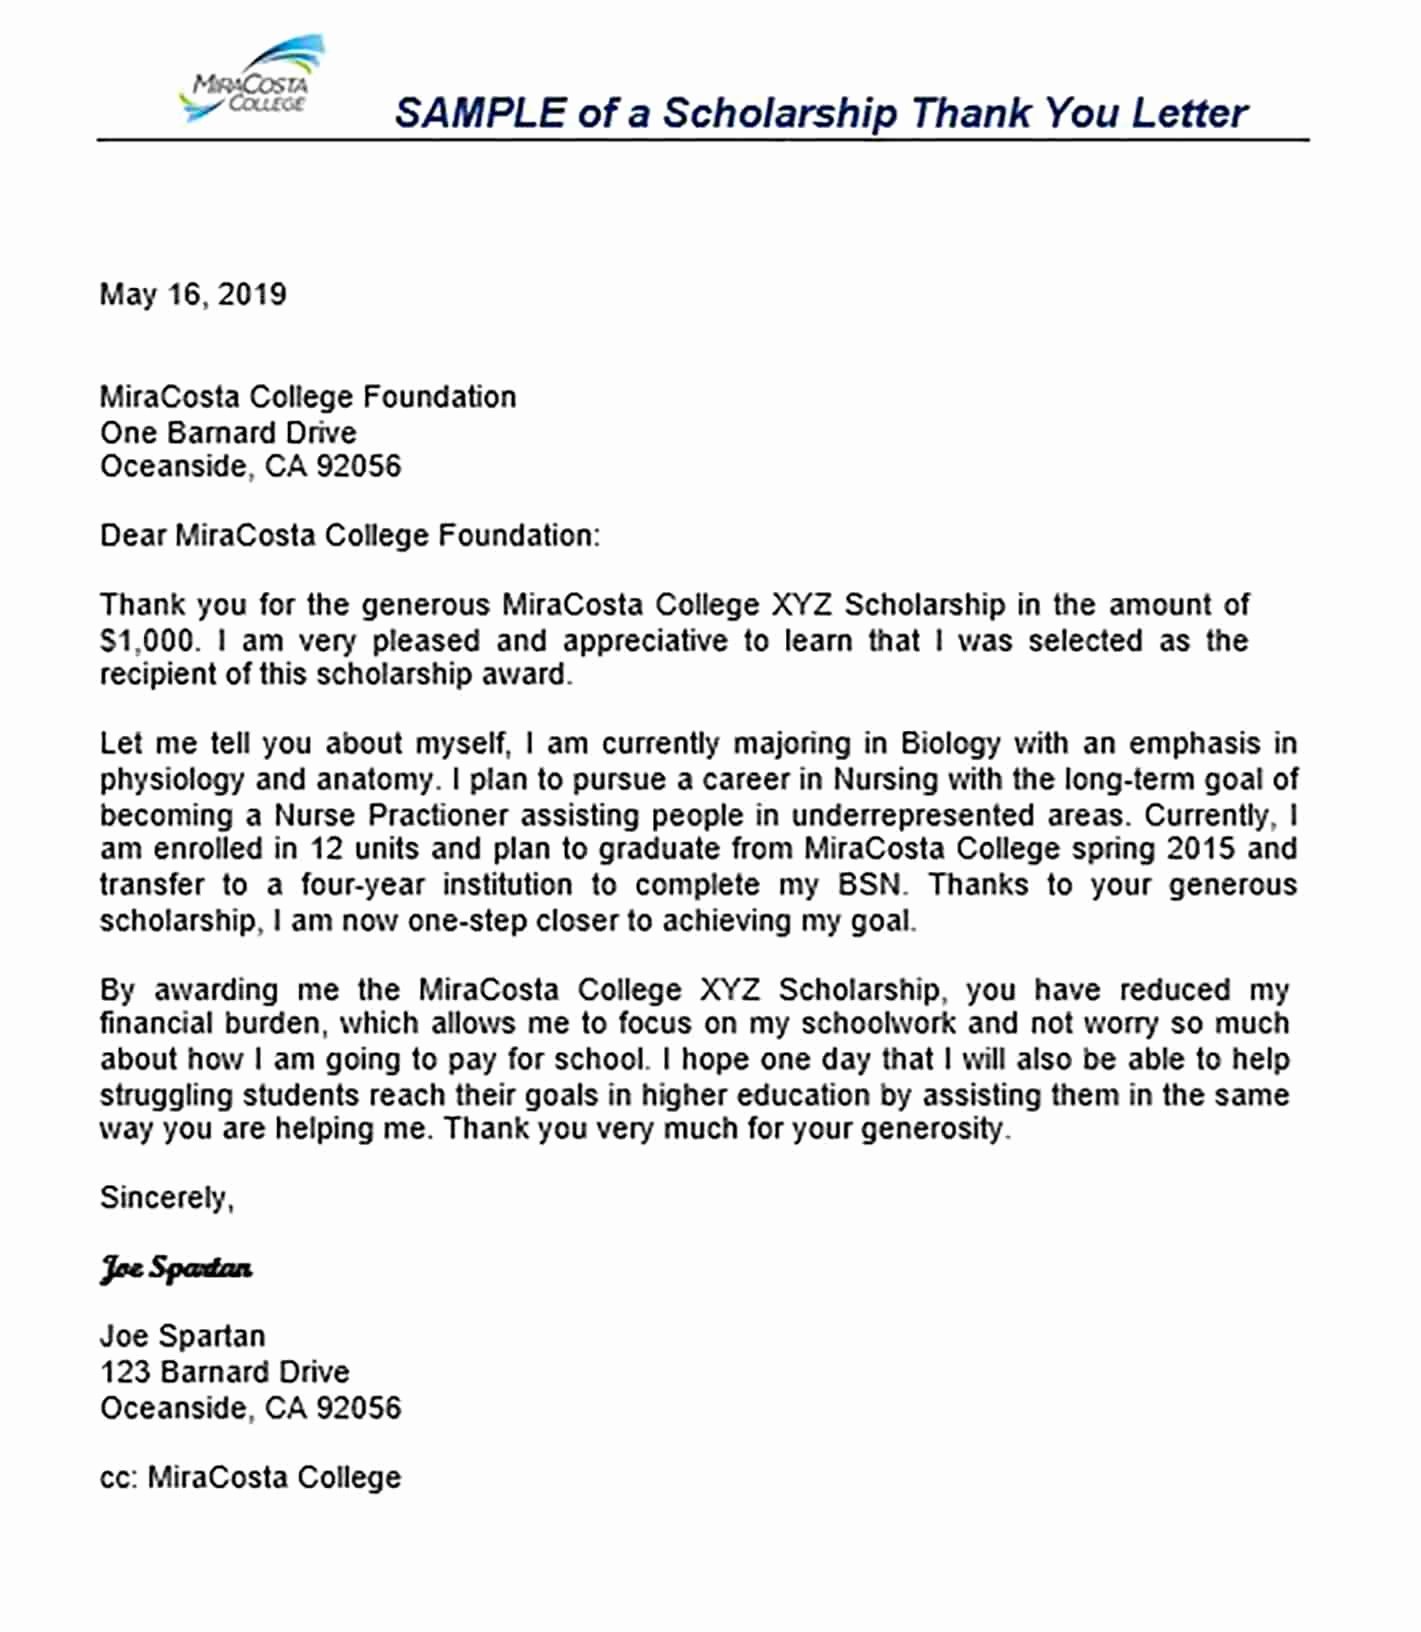 Sample Scholarship Thank You Letter Best Of 11 Scholarship Thank You Letter Sample for Doc Pdf